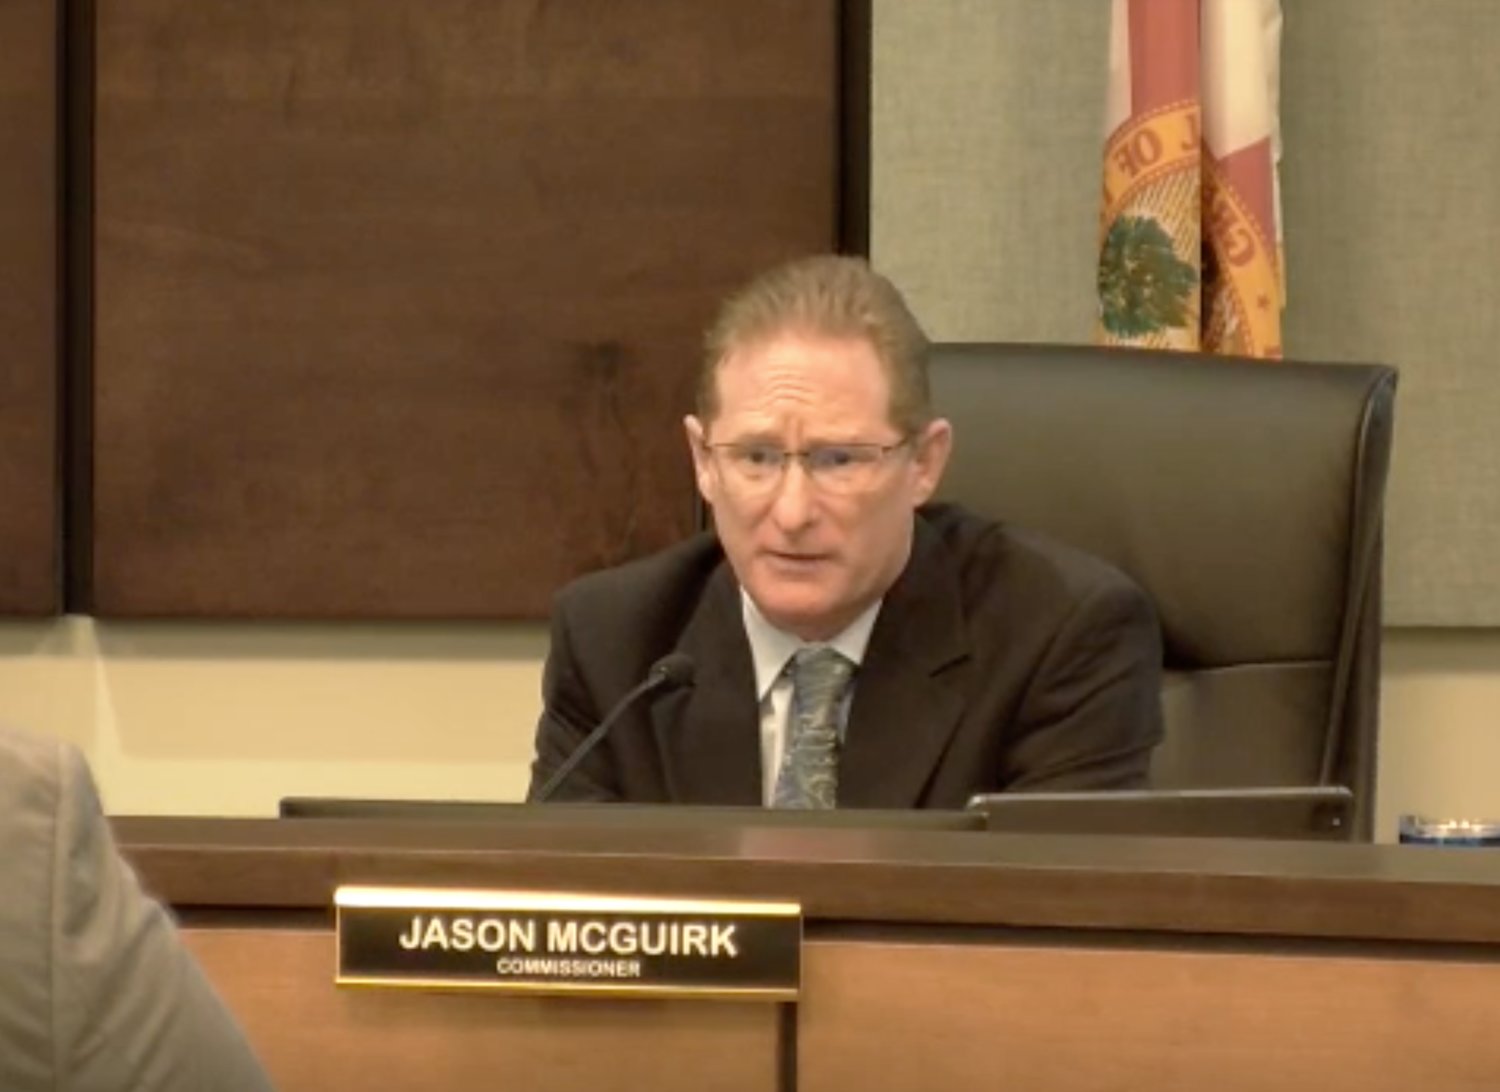 Commissioner Jason McGuirk had his reservations, but still voted in favor.